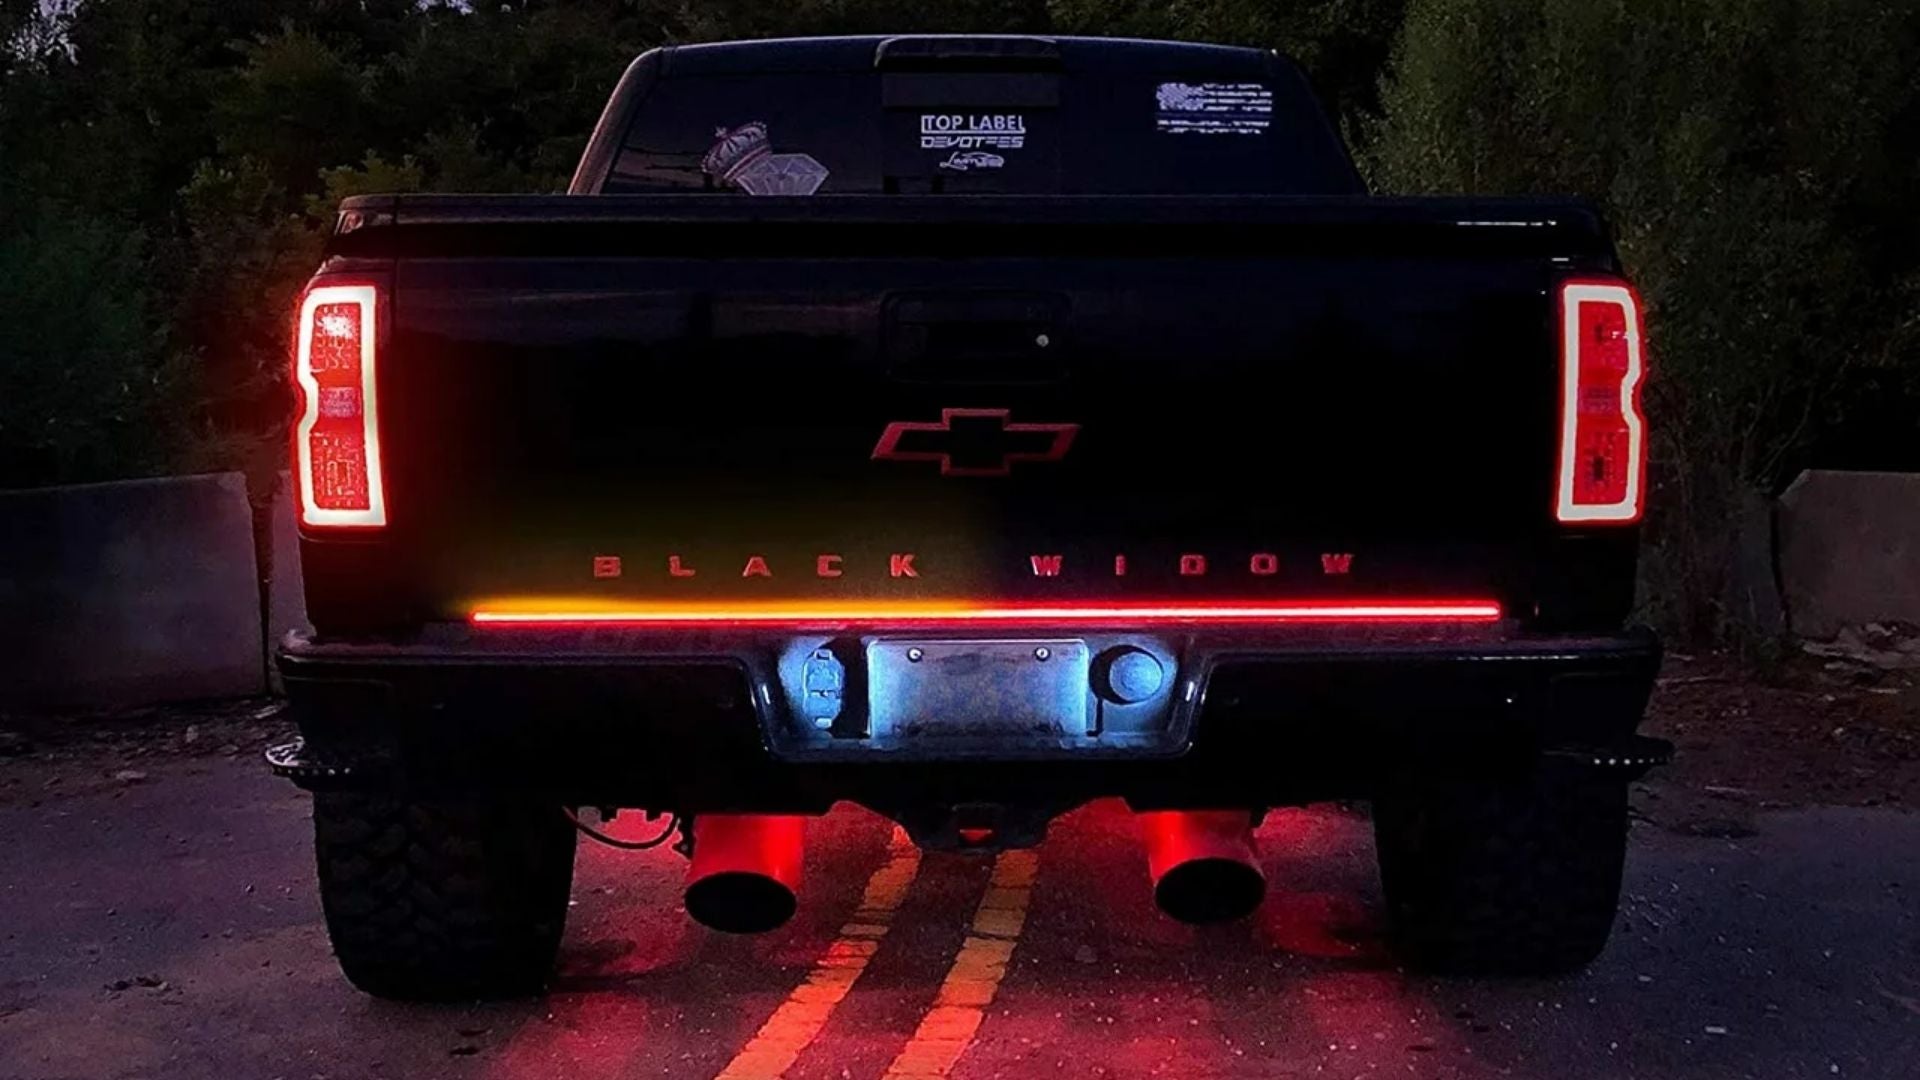 https://www.thedrive.com/content/2019/09/best-tailgate-light-var.jpg?quality=85